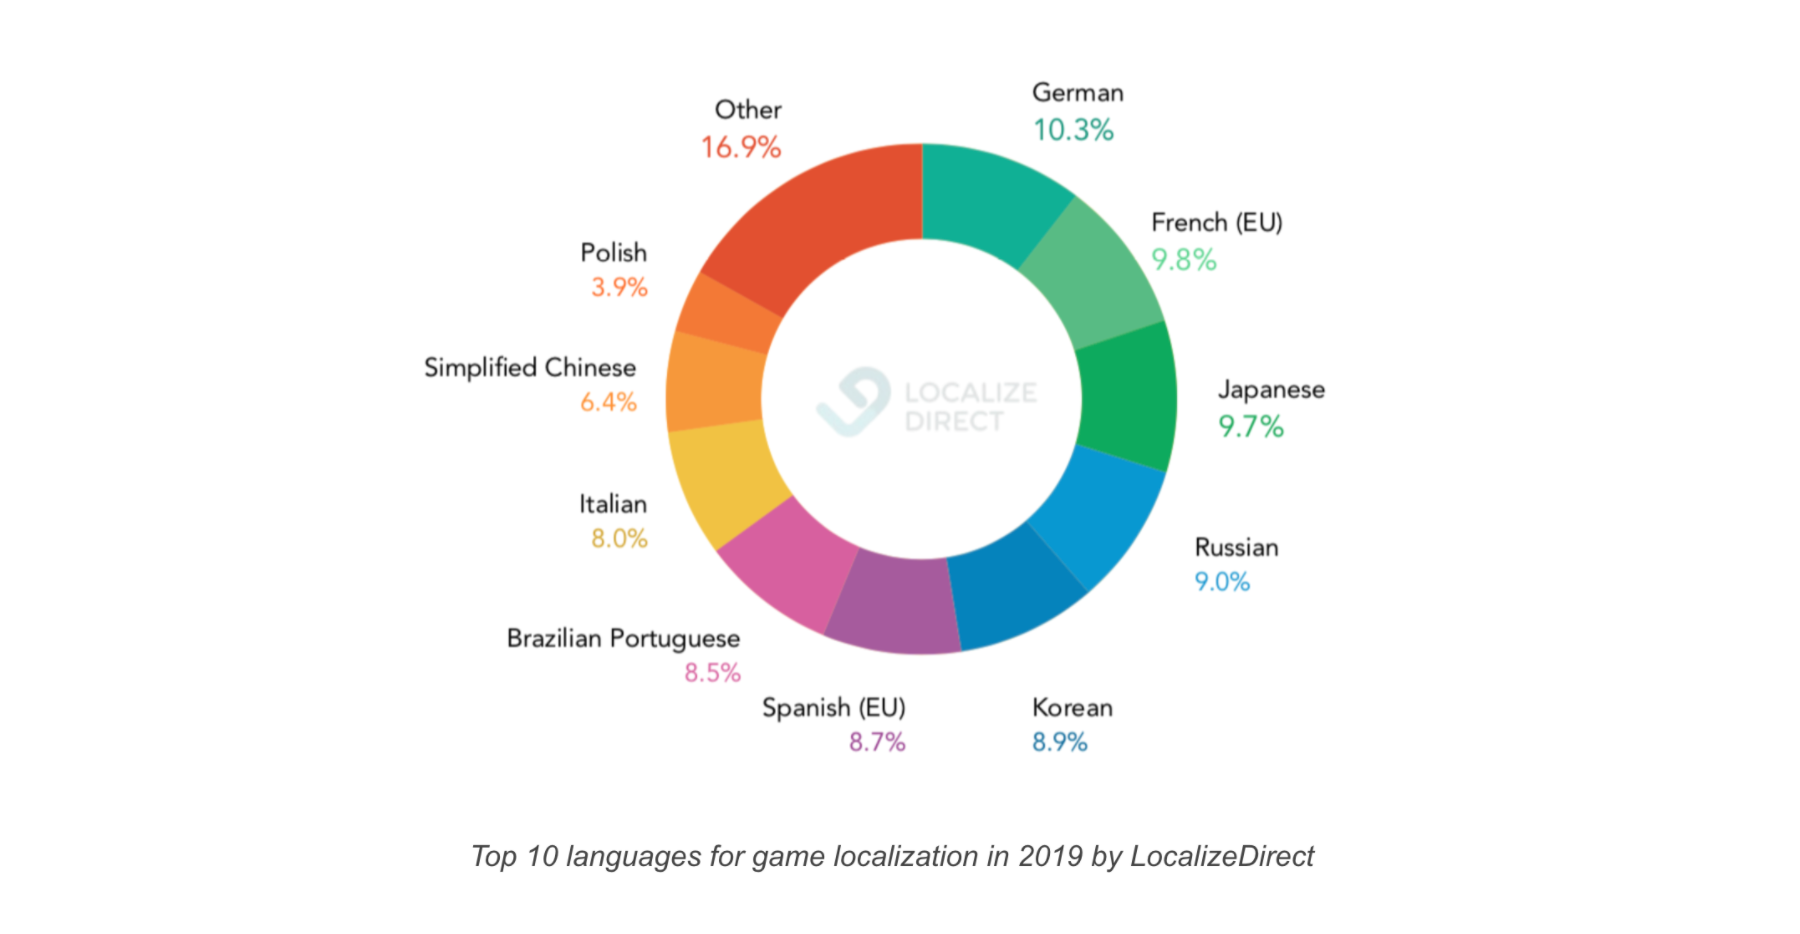 Top 10 languages for game localization in 2019